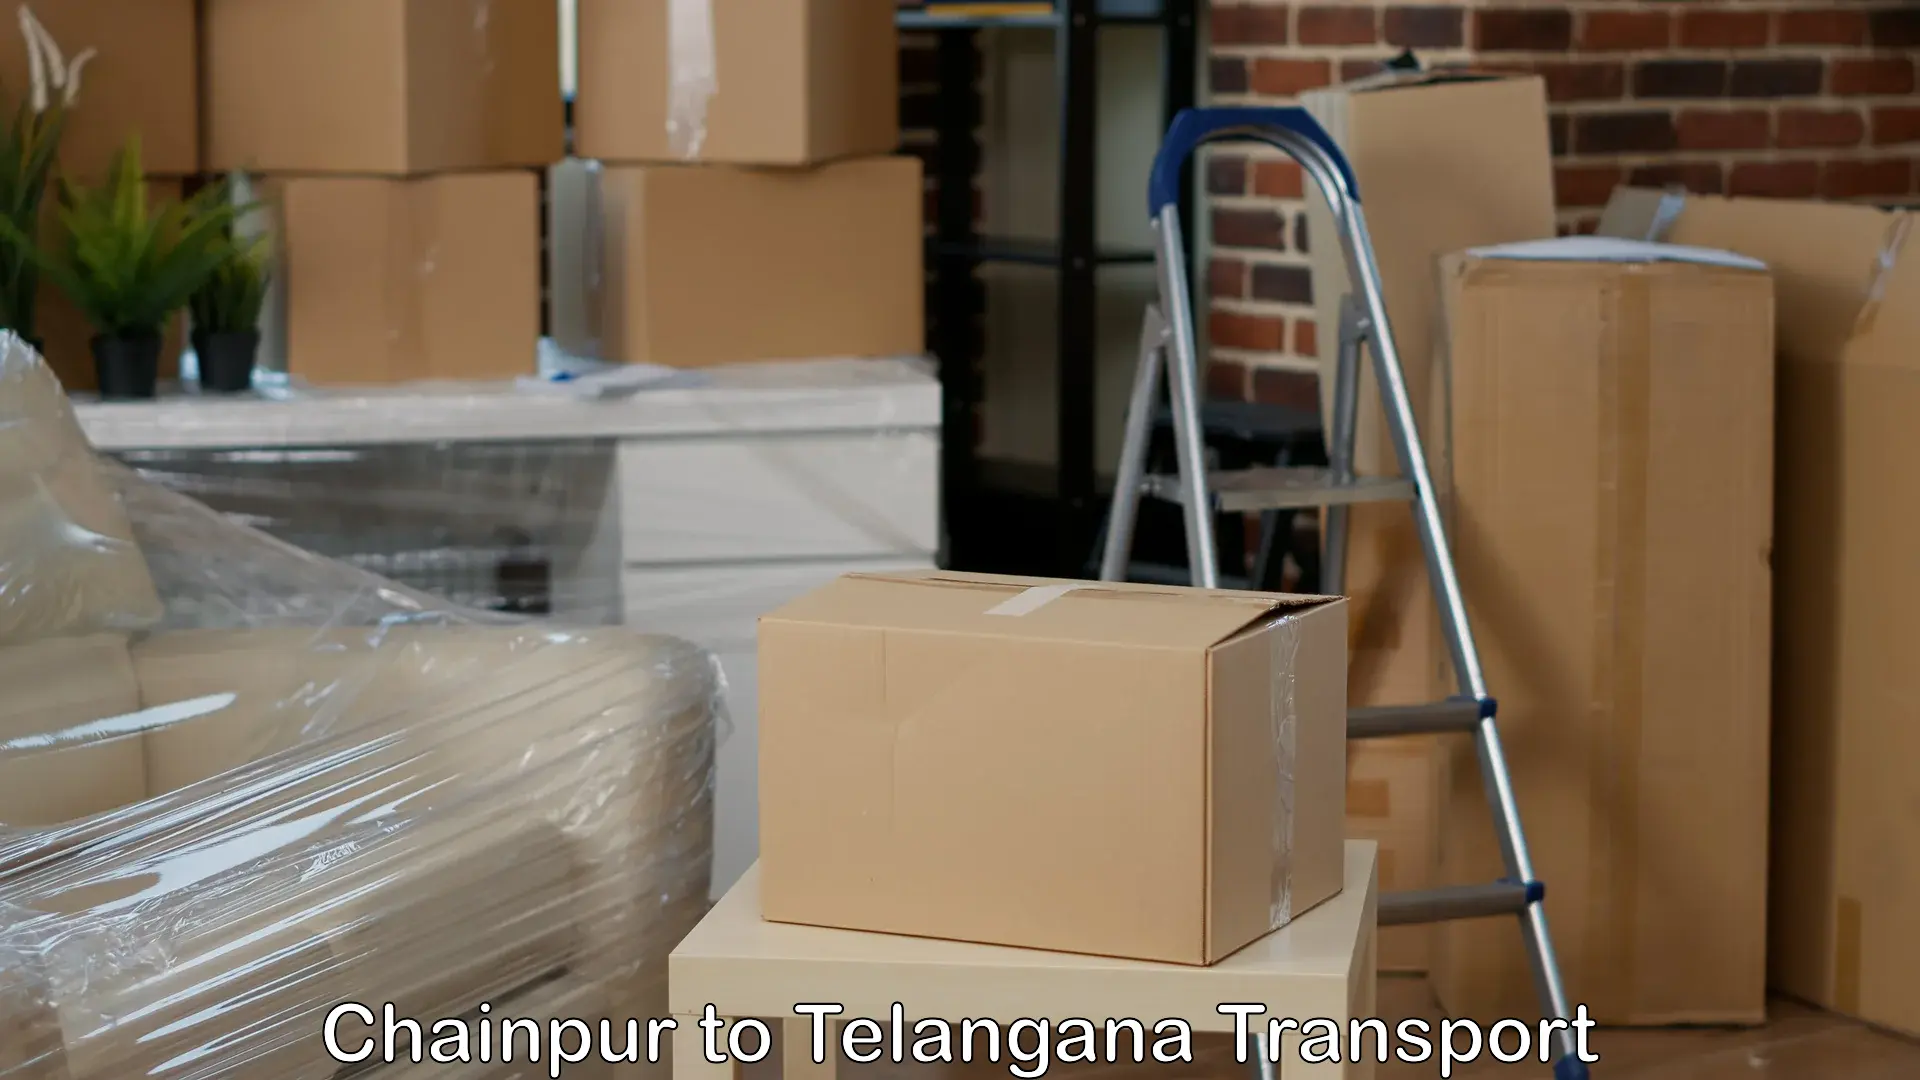 Air cargo transport services in Chainpur to Navipet